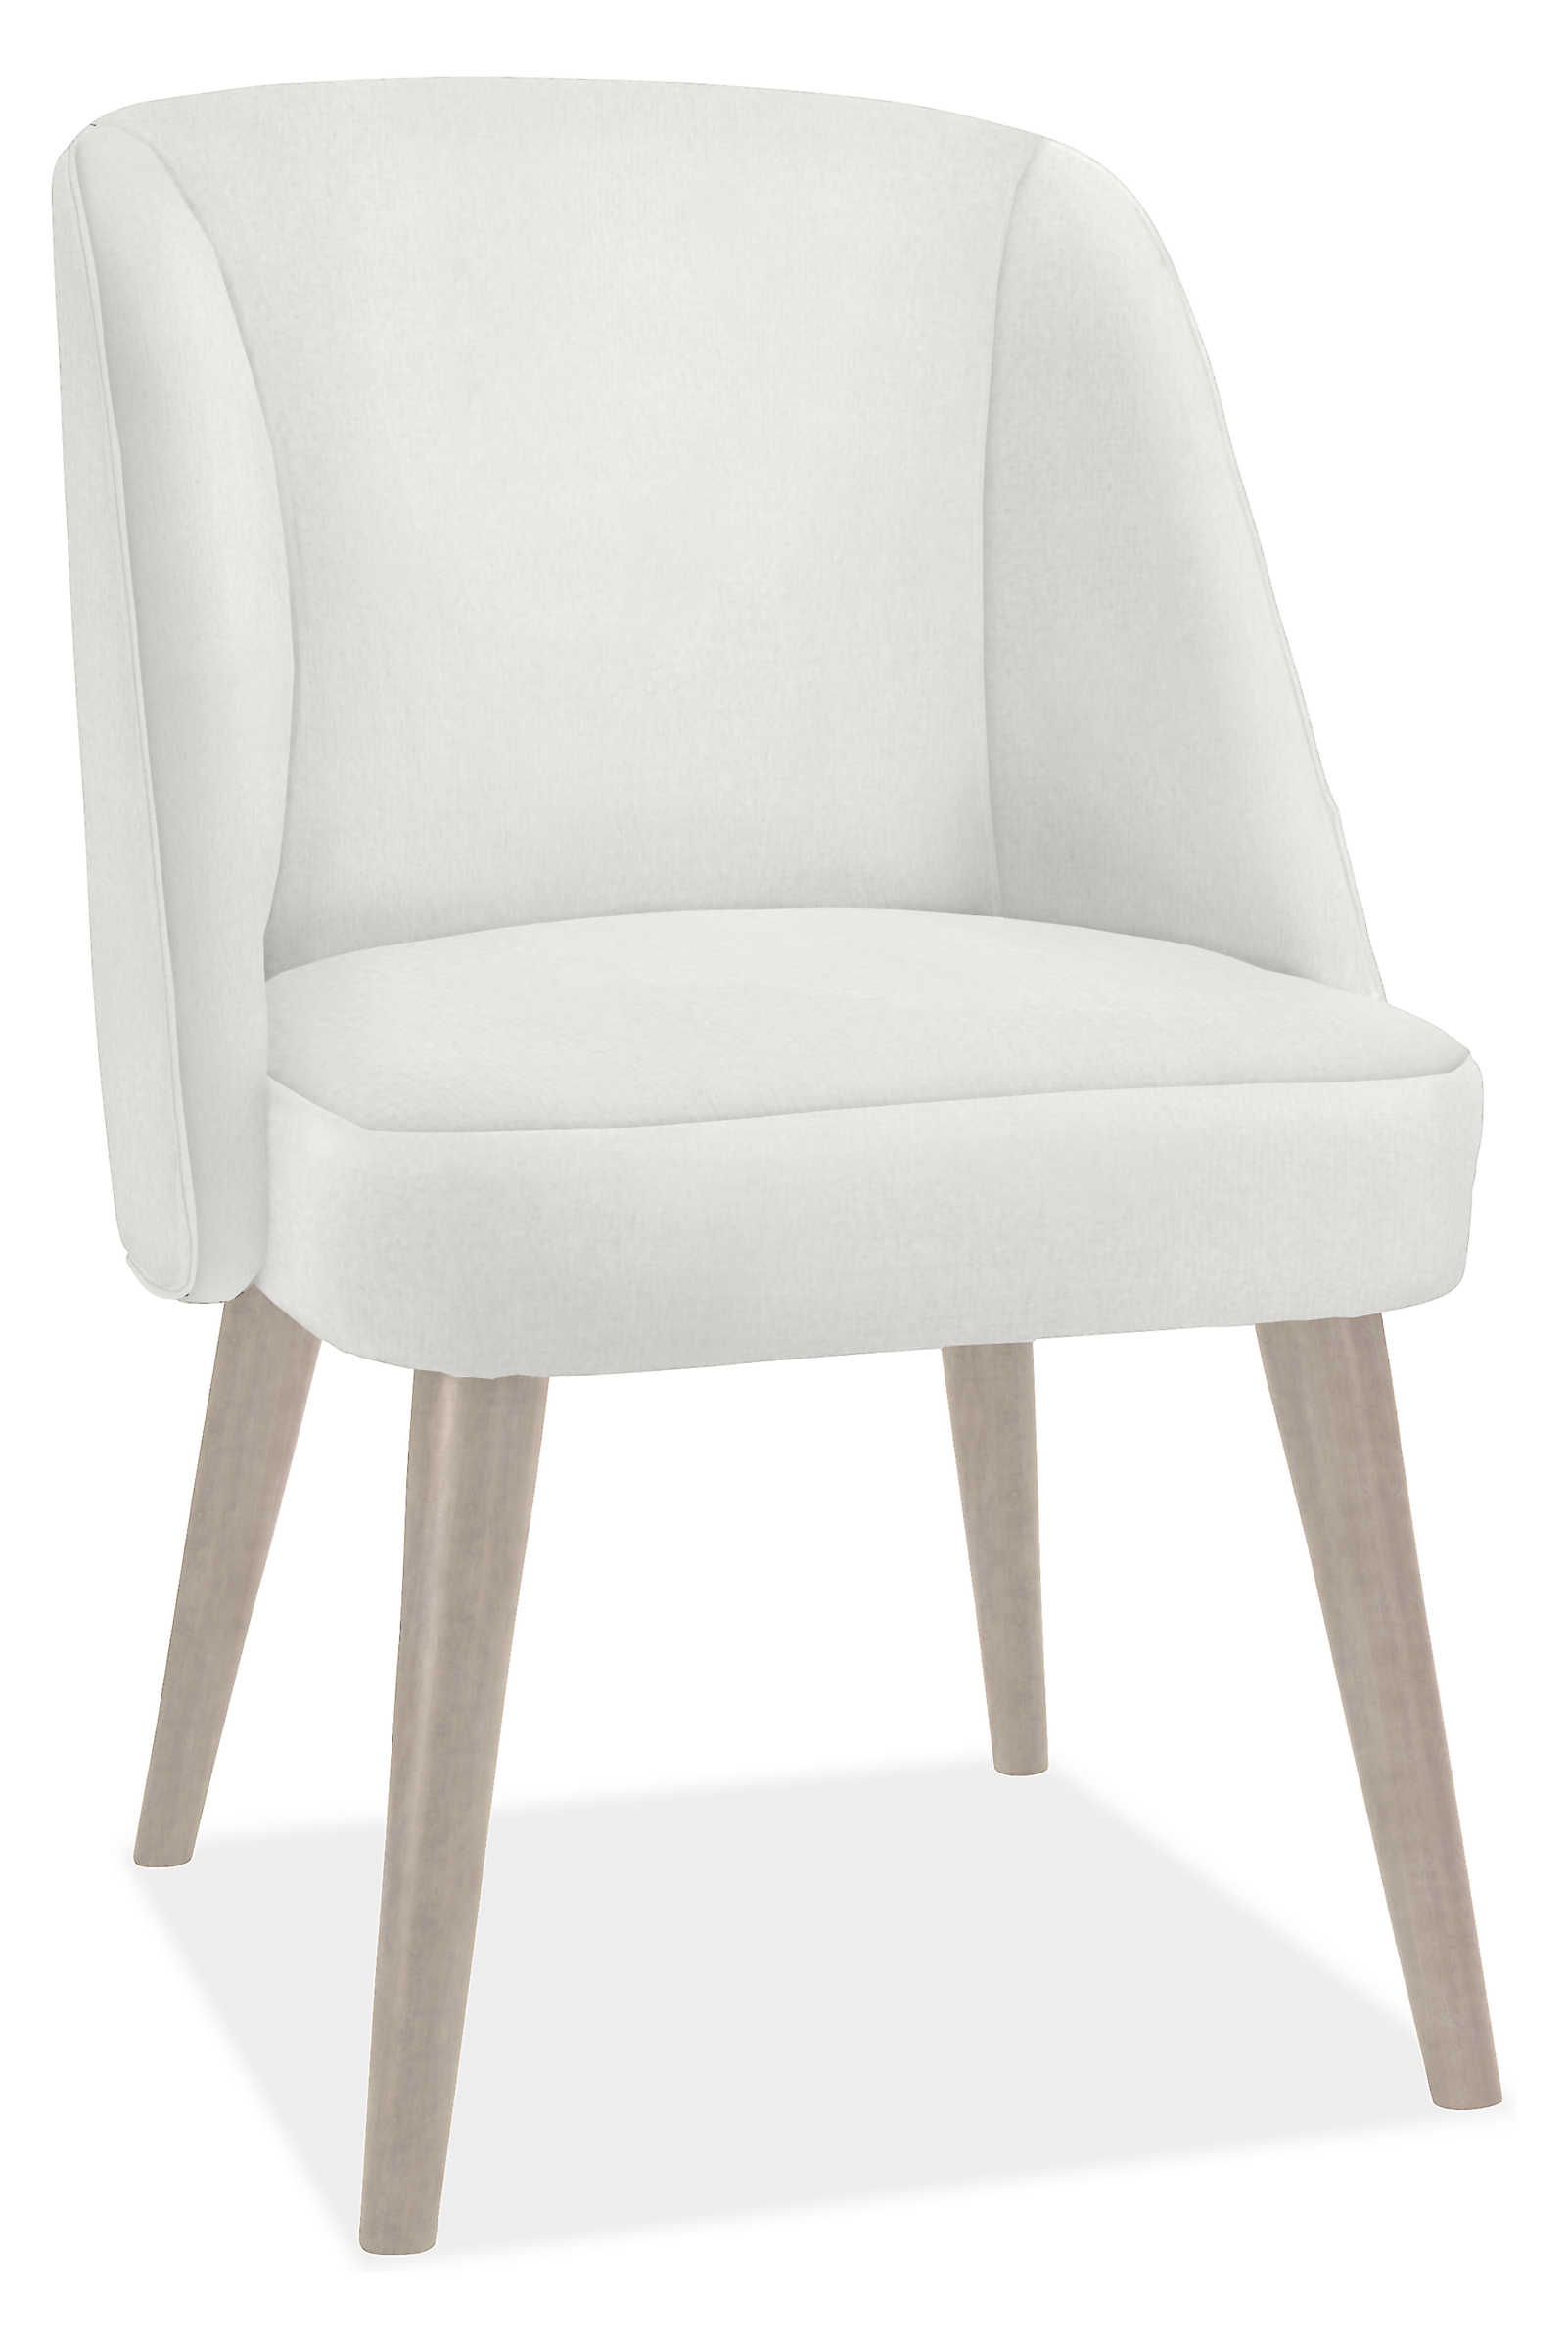 Cora Side Chair in View White with Shell Legs